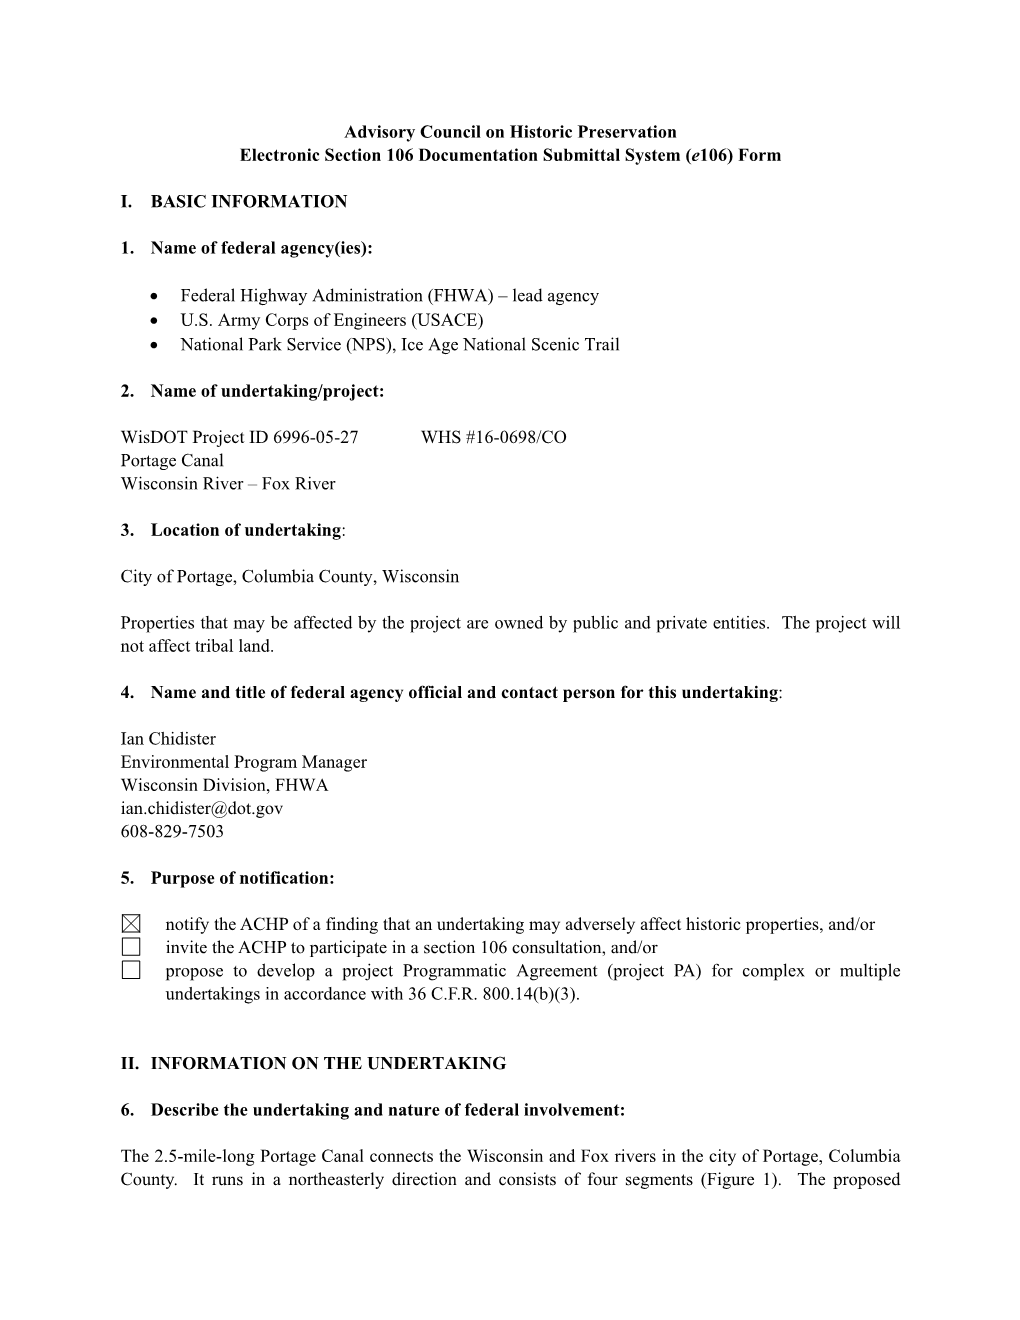 Advisory Council on Historic Preservation Electronic Section 106 Documentation Submittal System (E106) Form